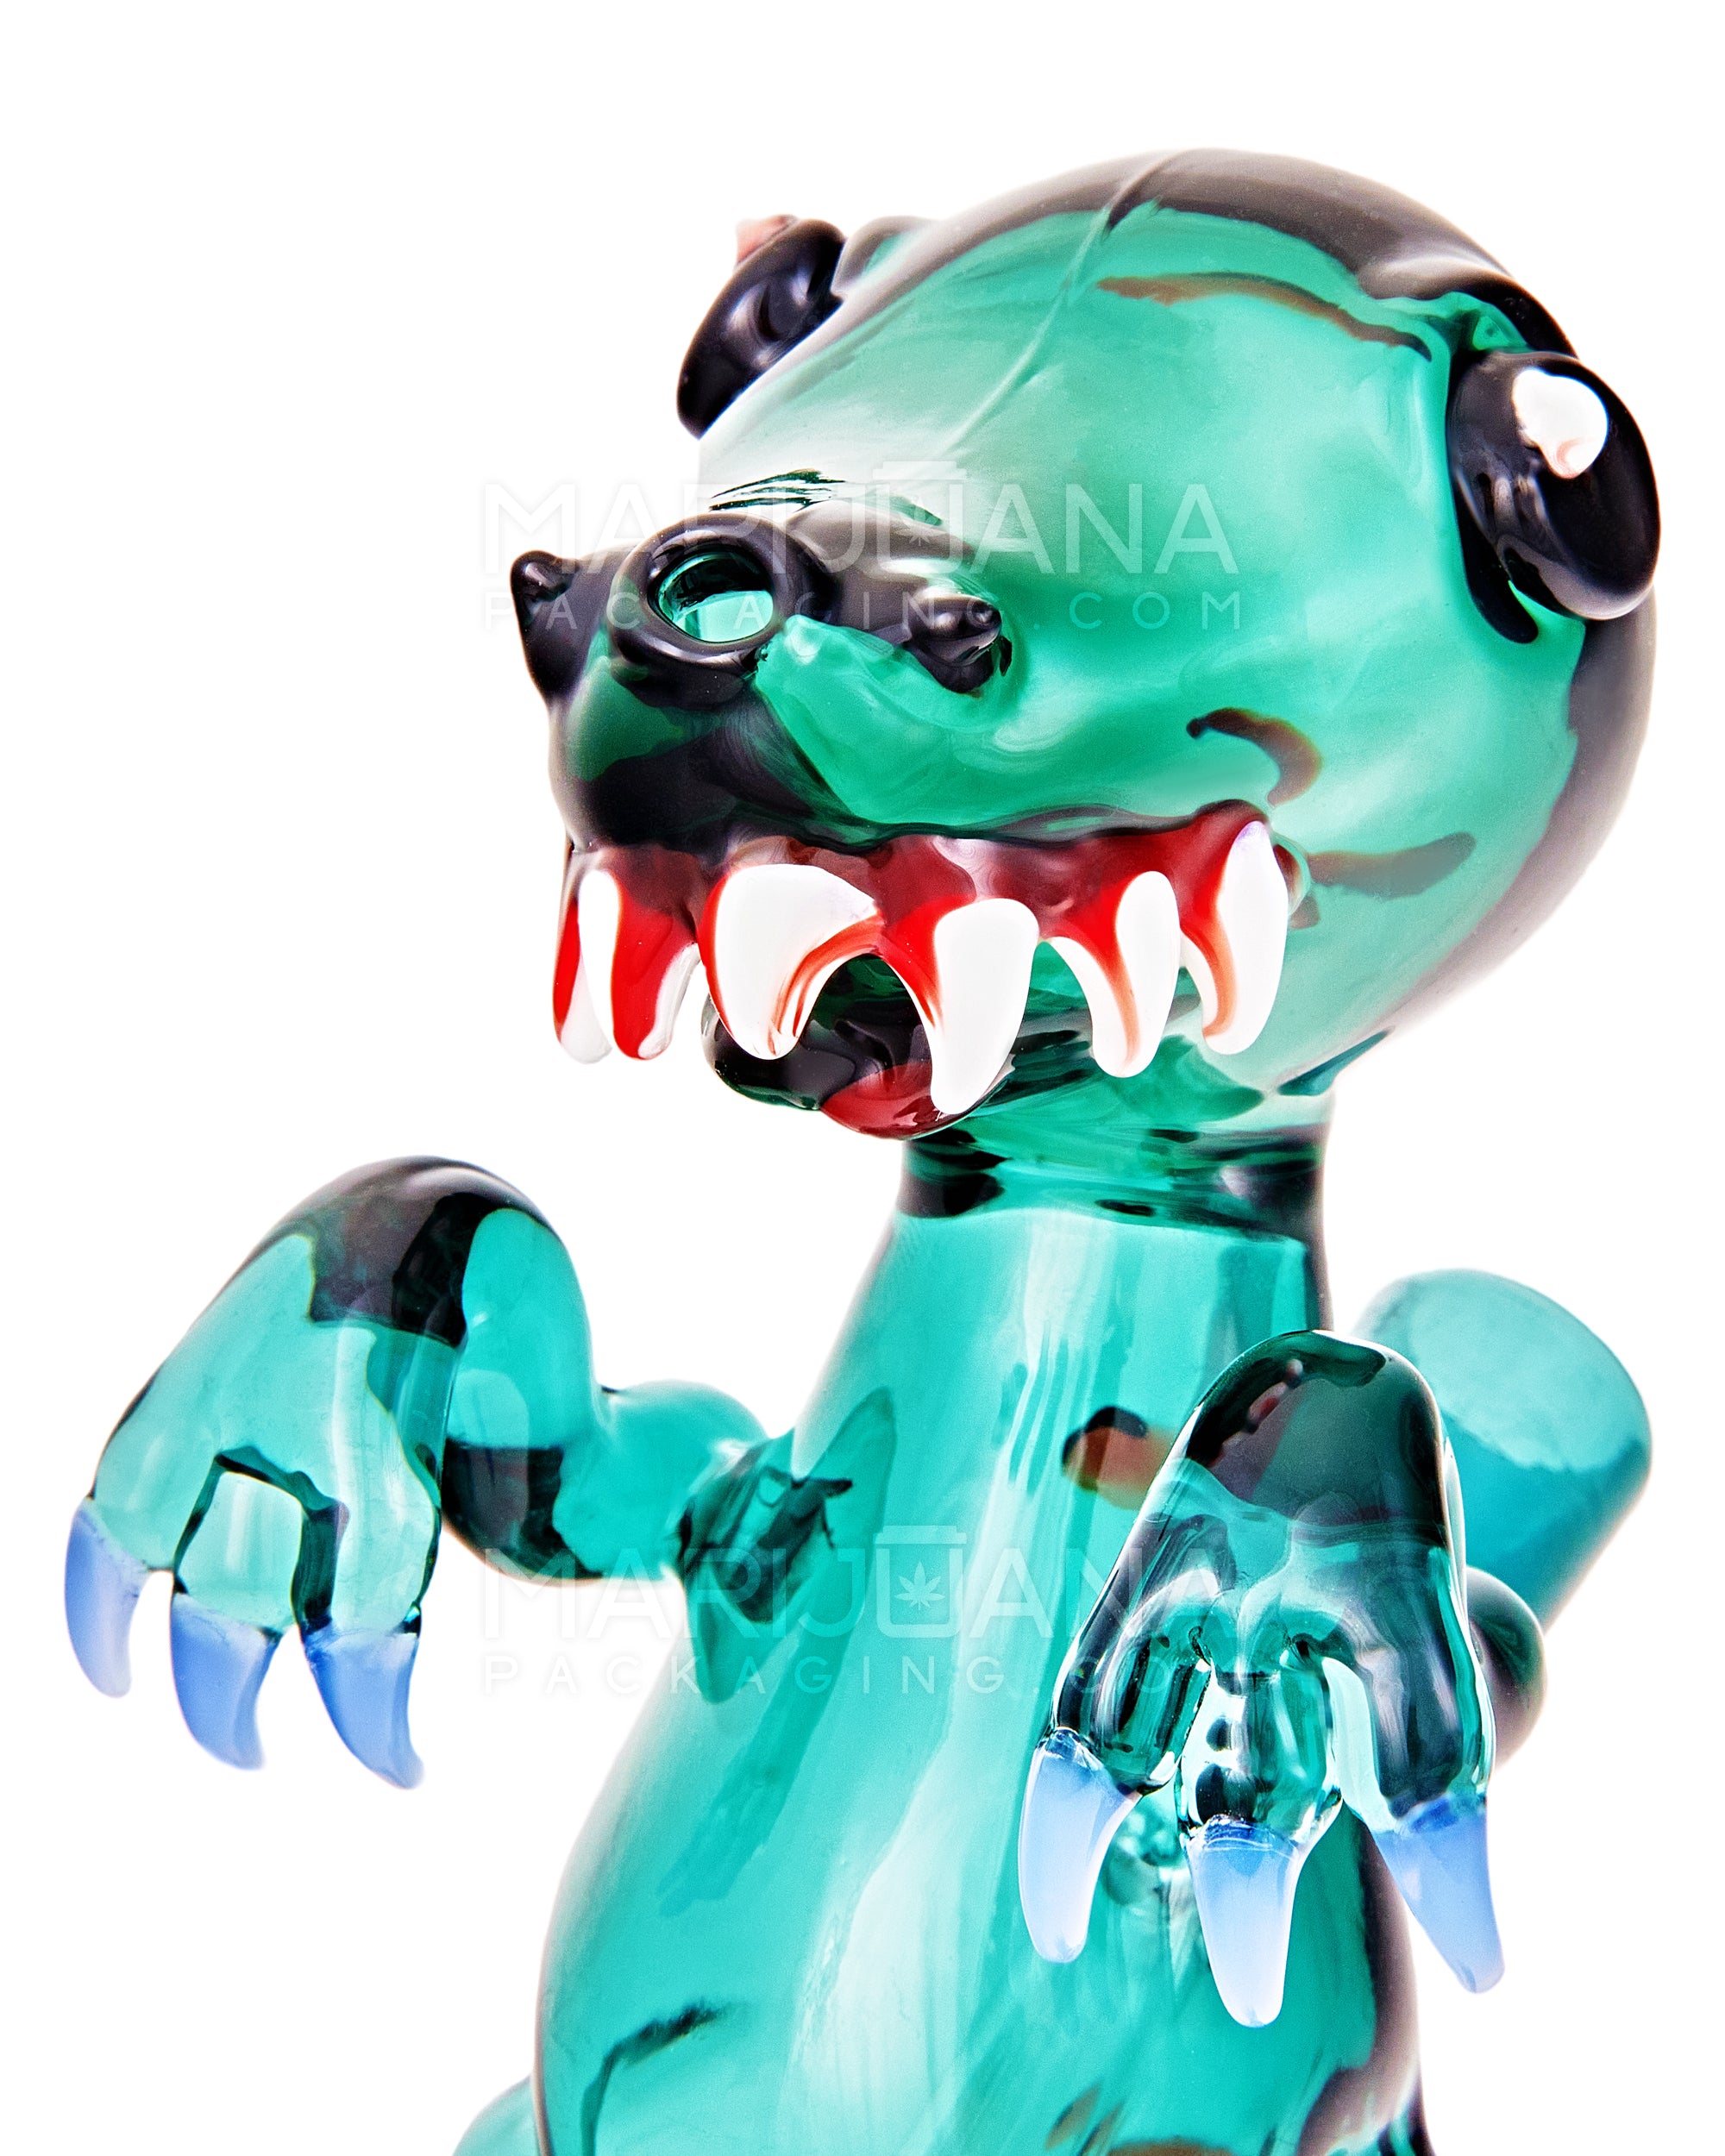 Heady | USA Glass Raptor Glass Dinosaur Water Pipe | 6in Tall - 14mm Bowl - Teal - 4